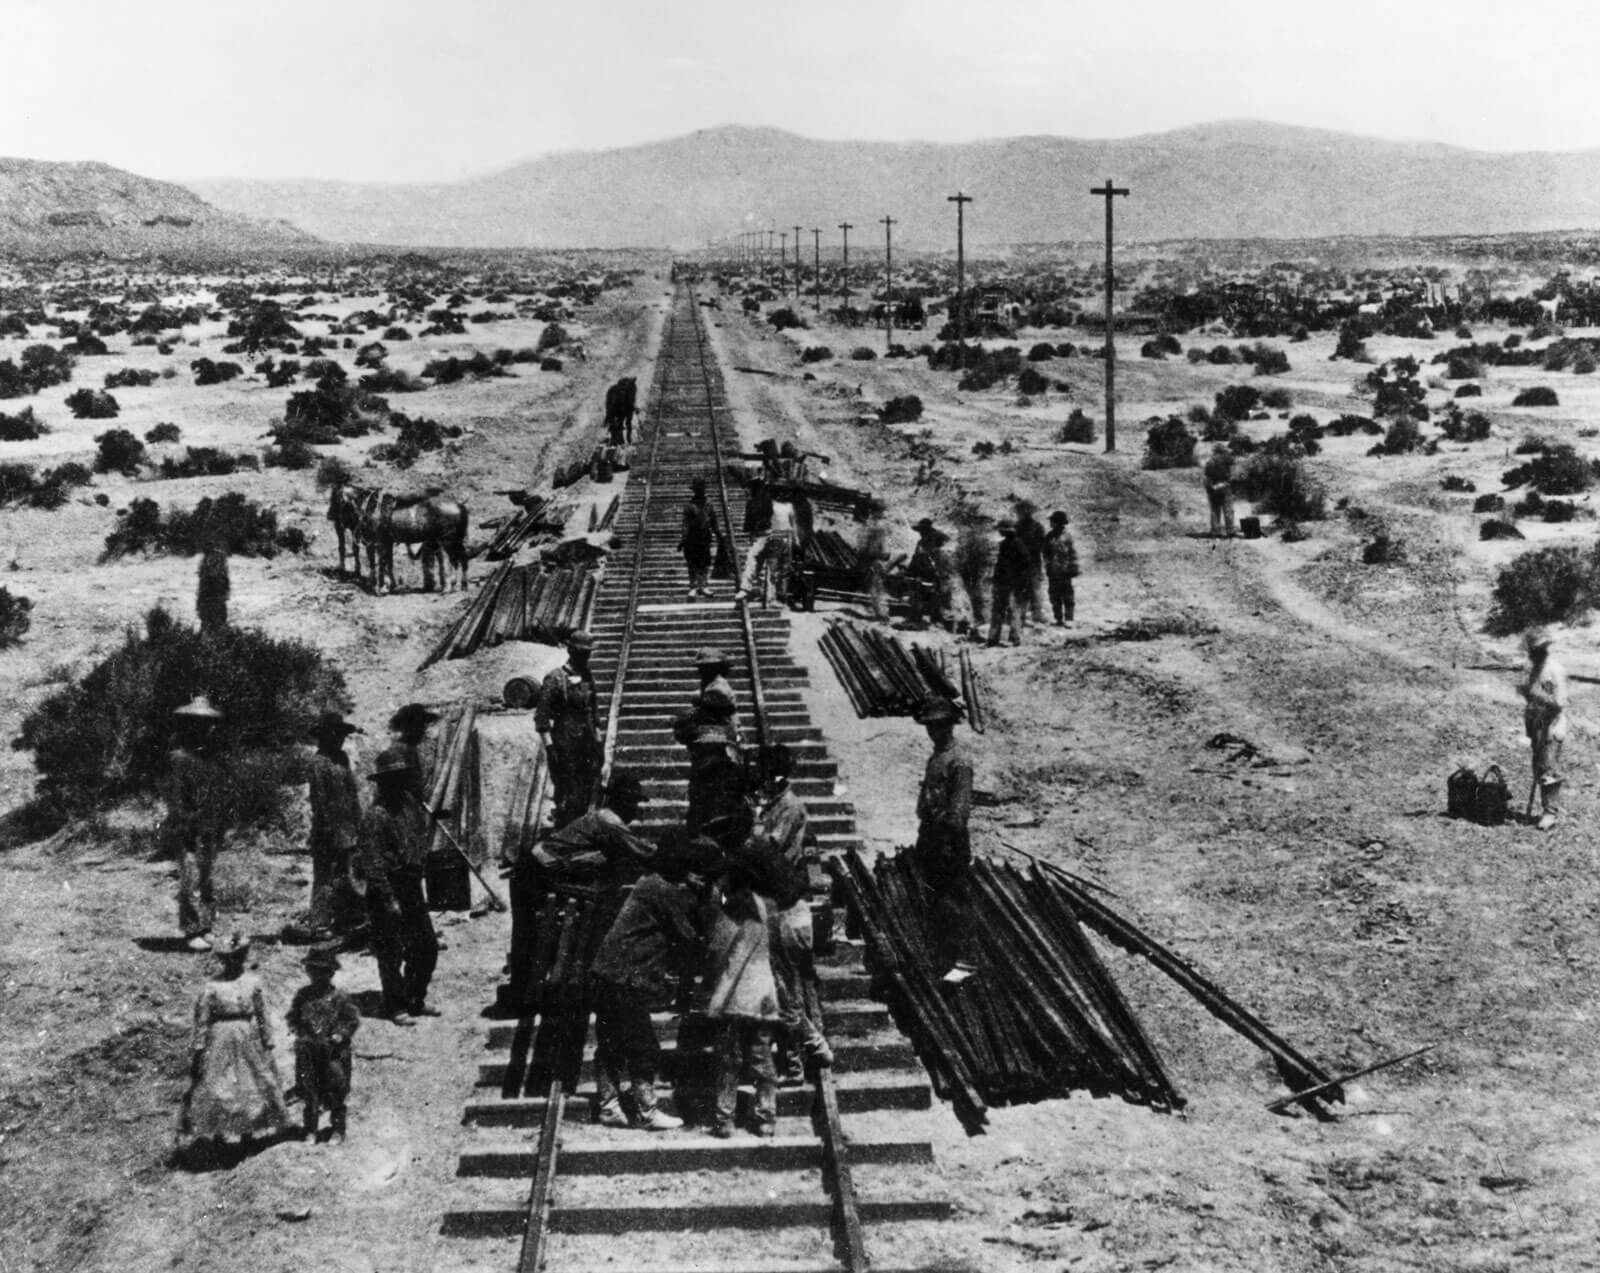 Workers laying tracks for the Central Pacific Railroad in Nevada, 1868.